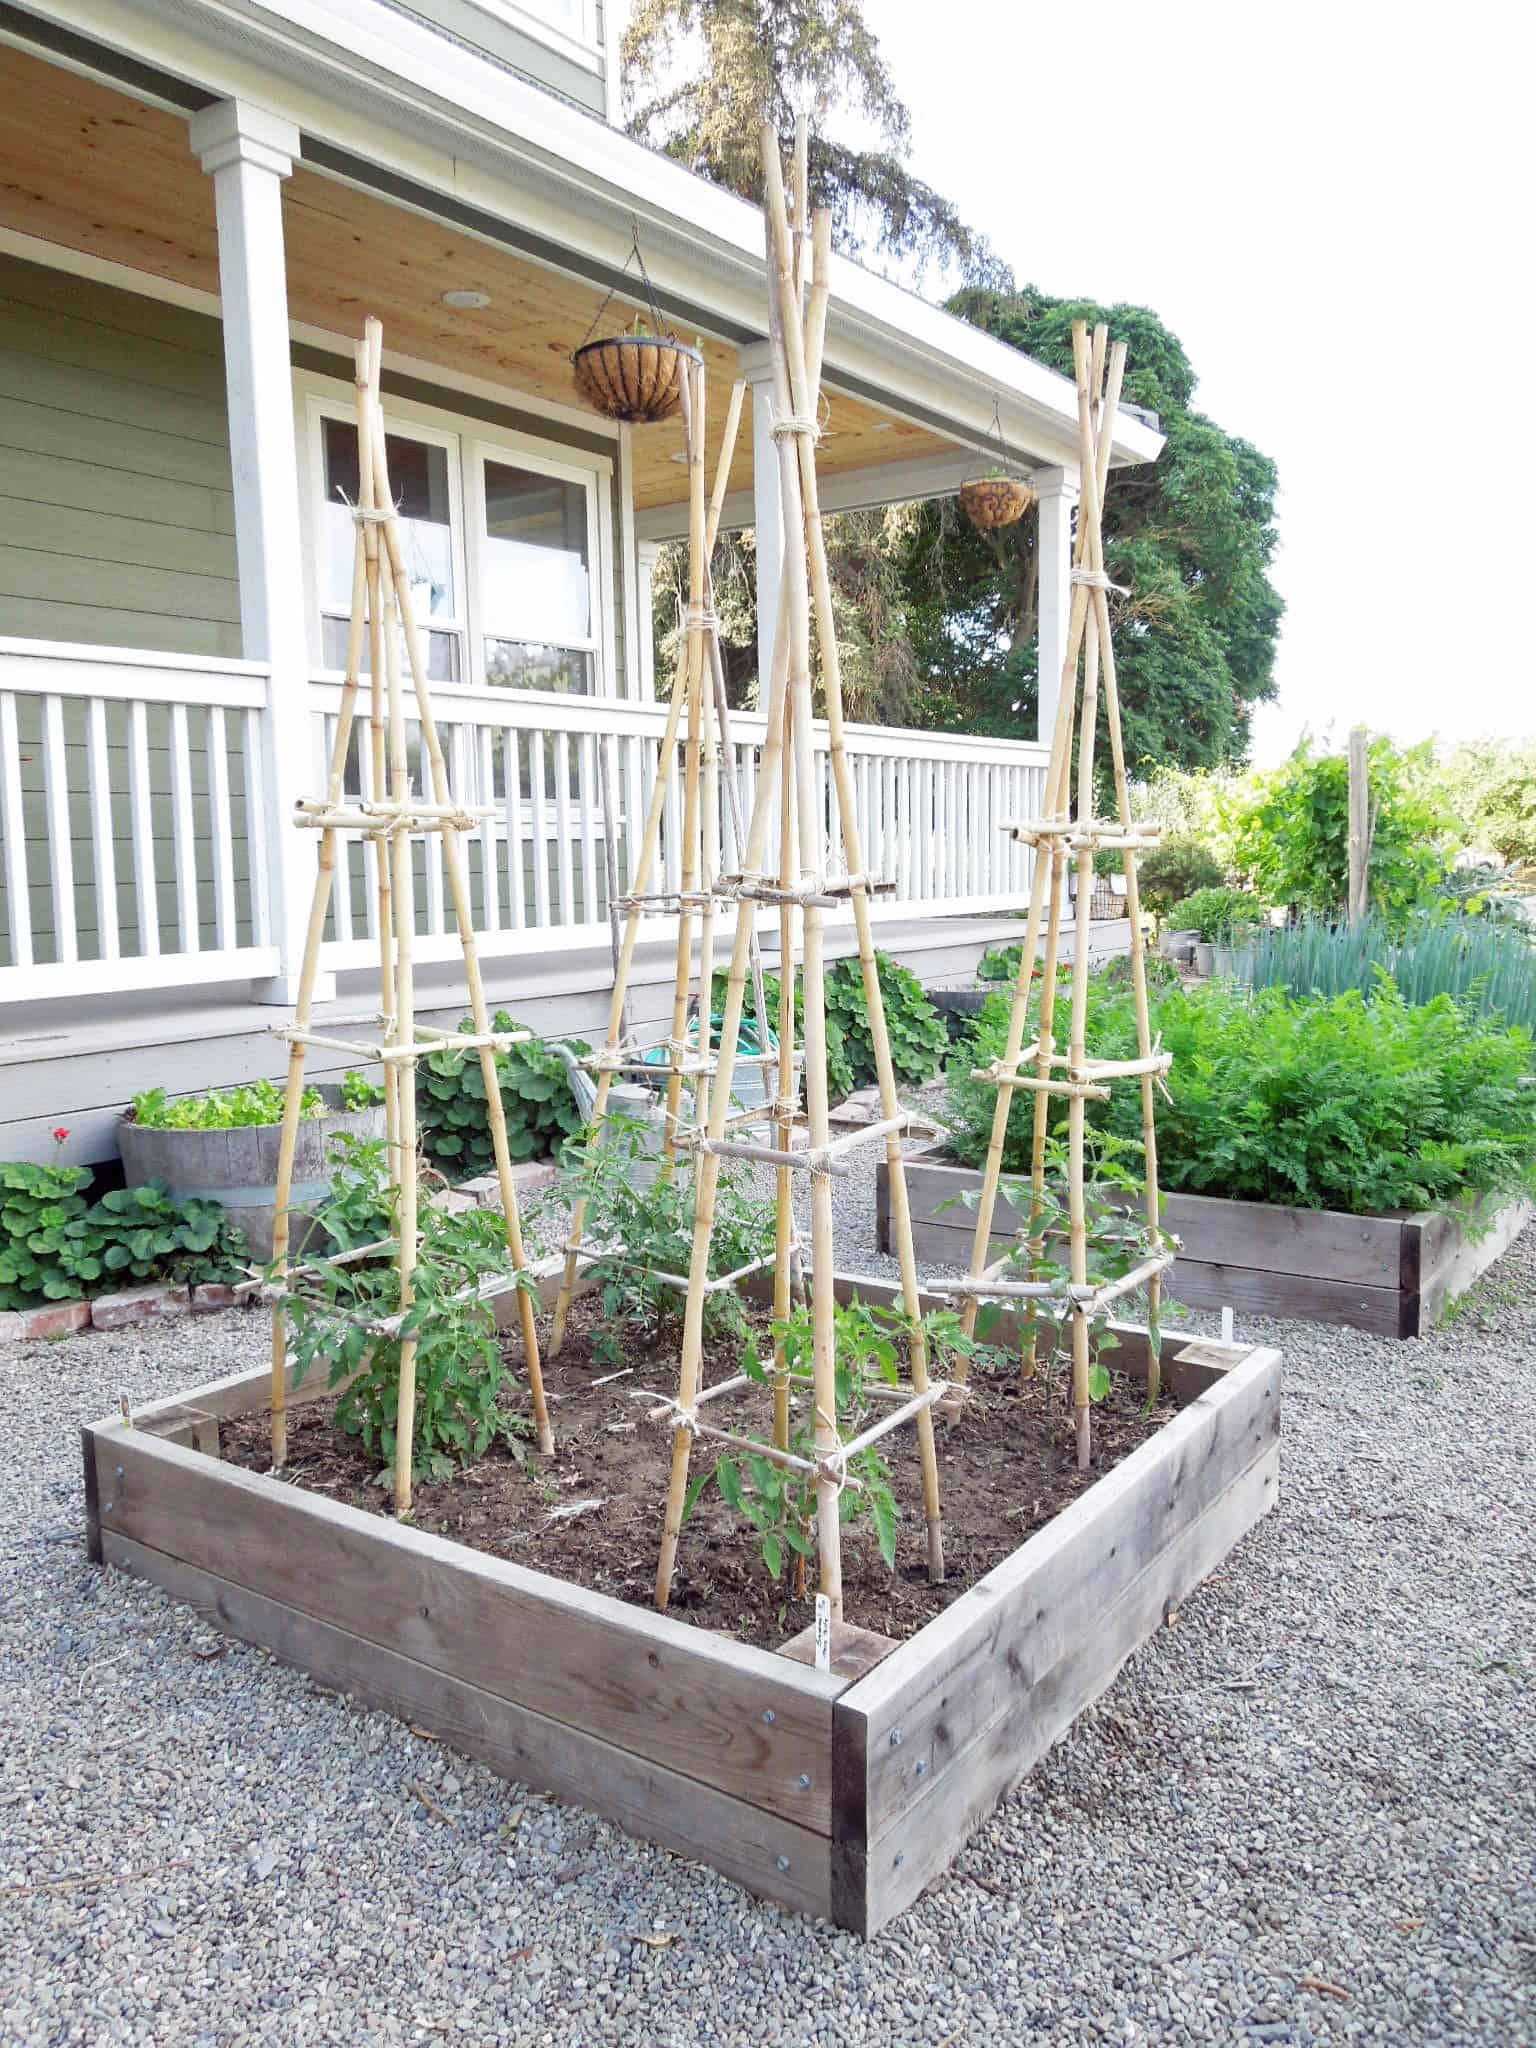 How to build a trellis for tomatoes